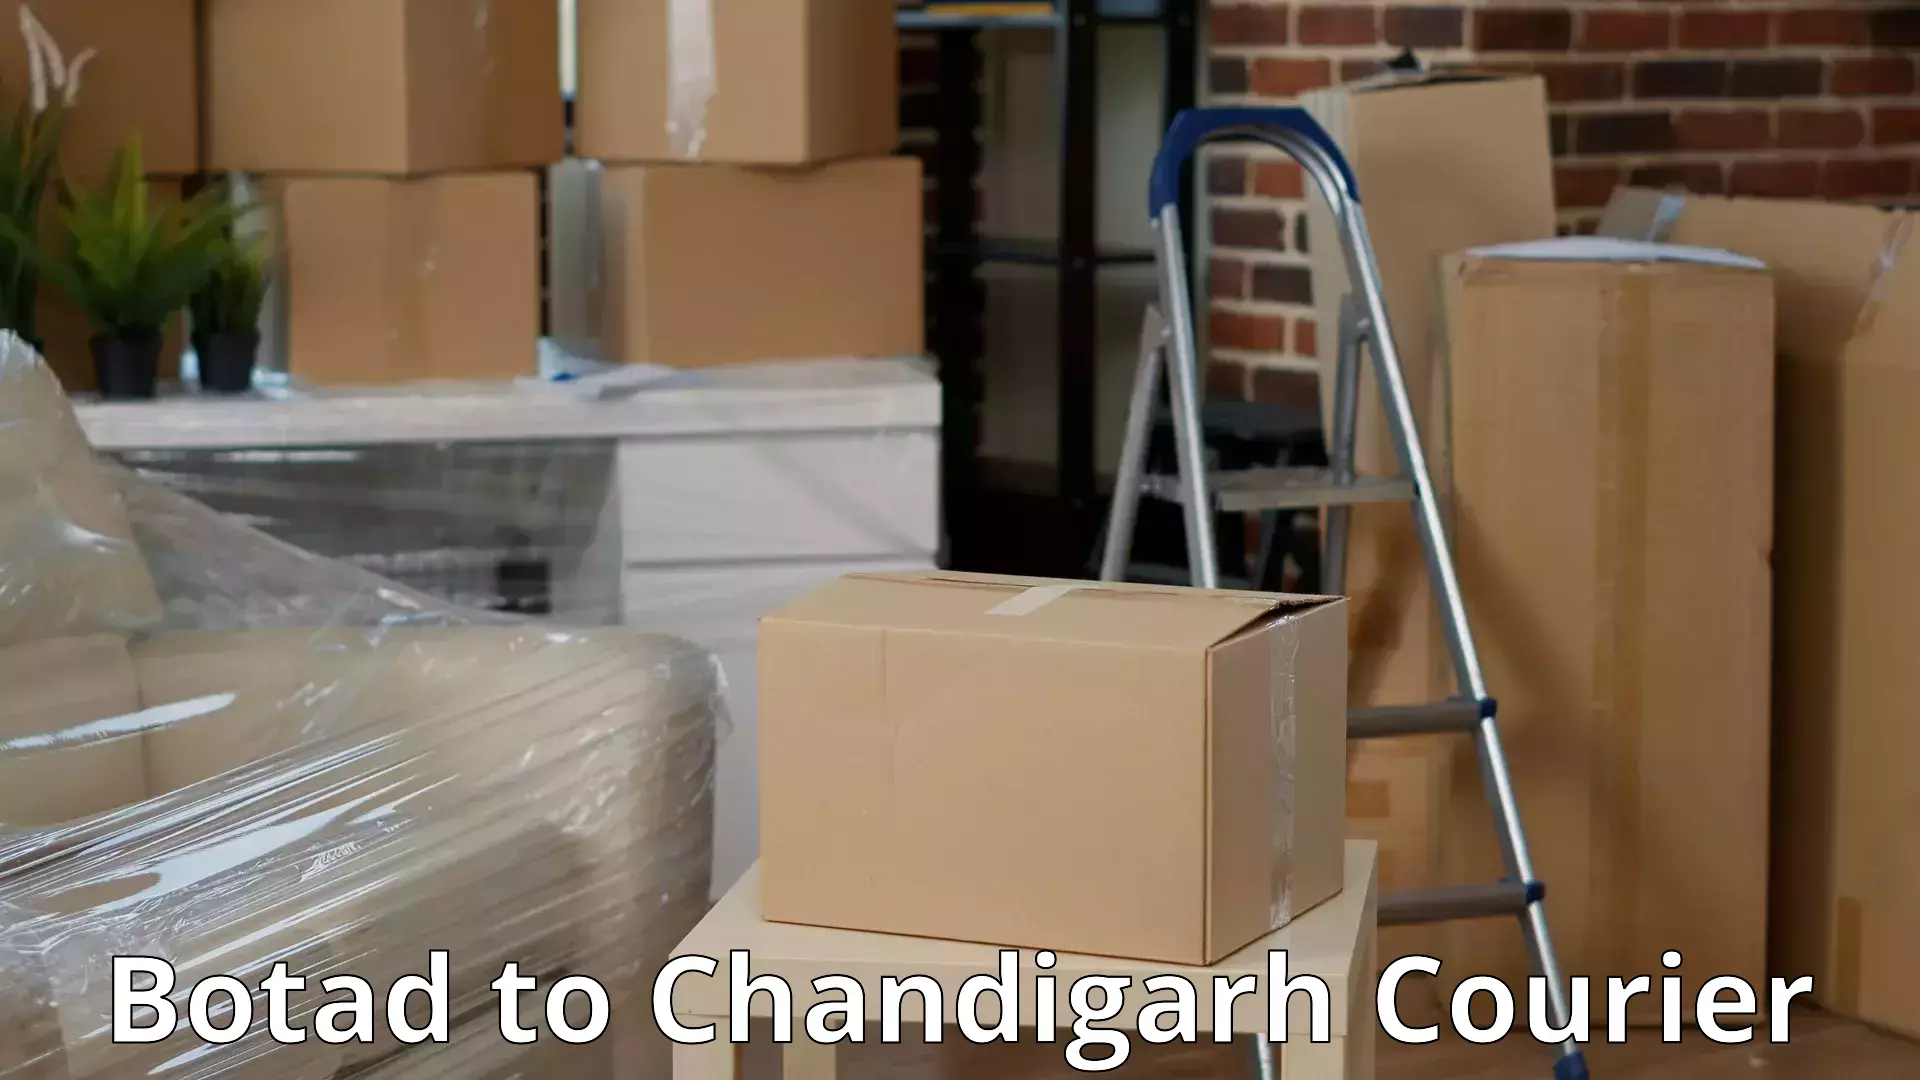 Home shifting experts Botad to Chandigarh